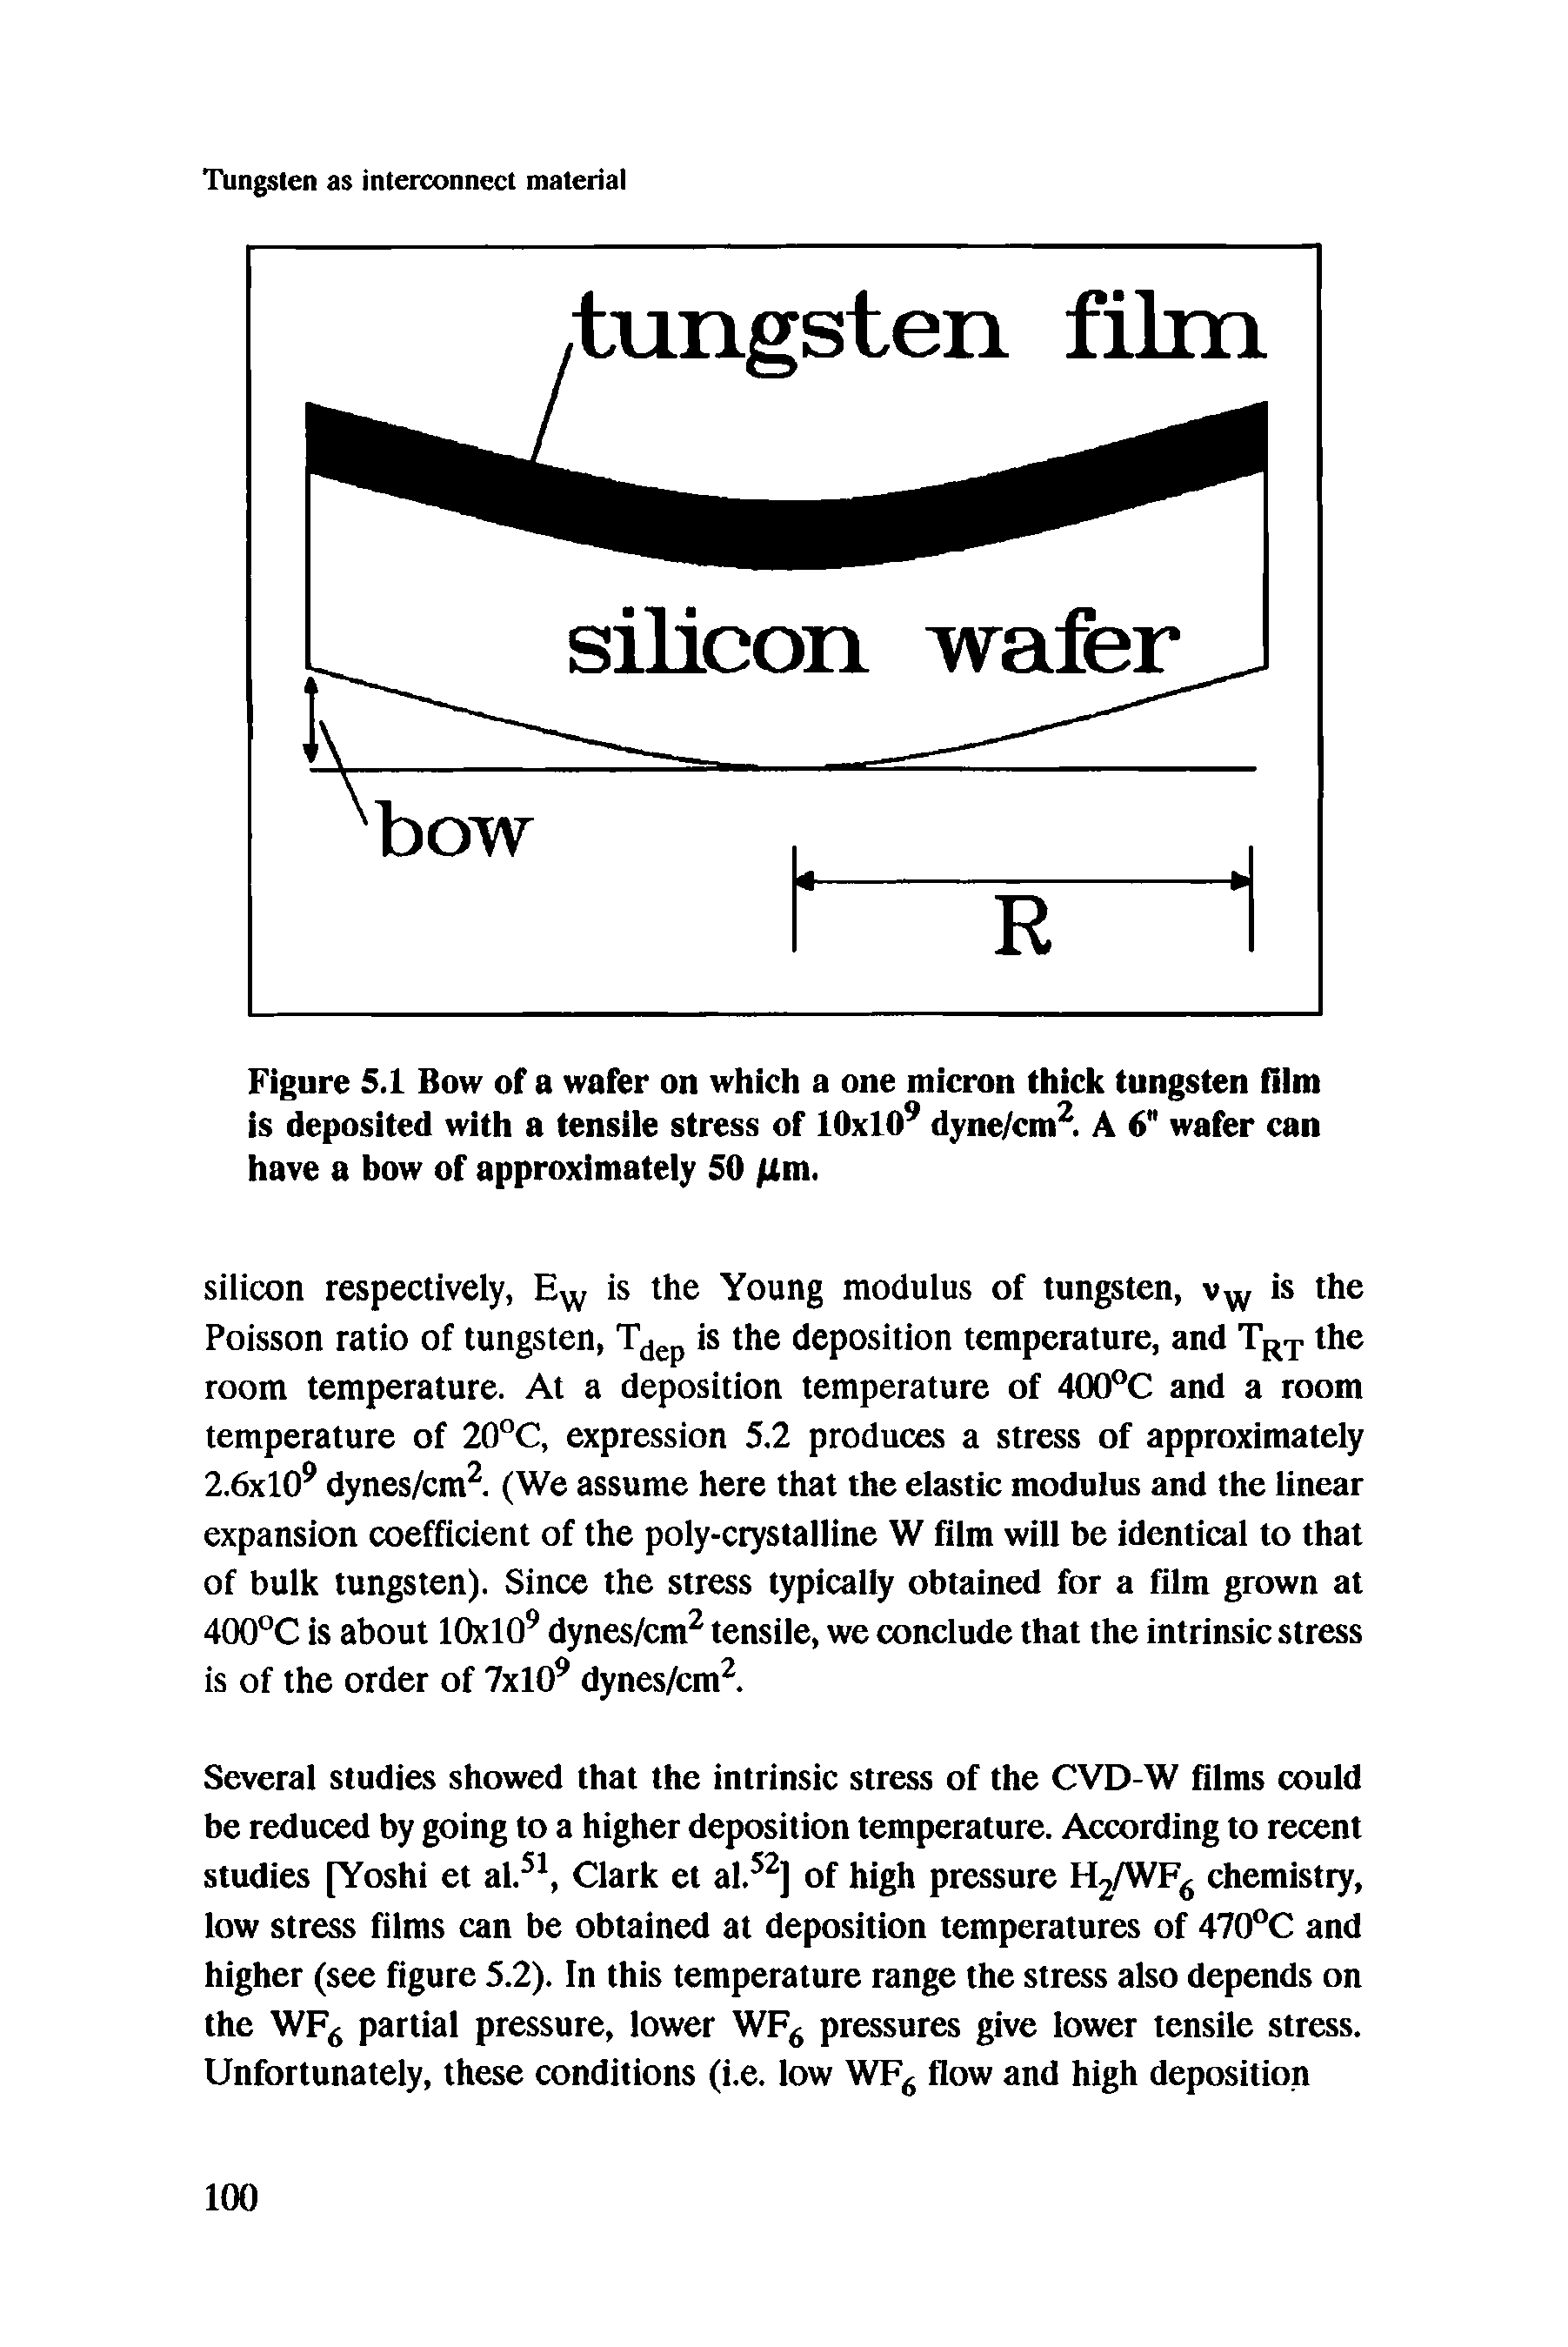 Figure 5.1 Bow of a wafer on which a one micron thick tungsten film is deposited with a tensile stress of lOxlO9 dyne/cm2. A 6" wafer can have a bow of approximately 50 /Zm.